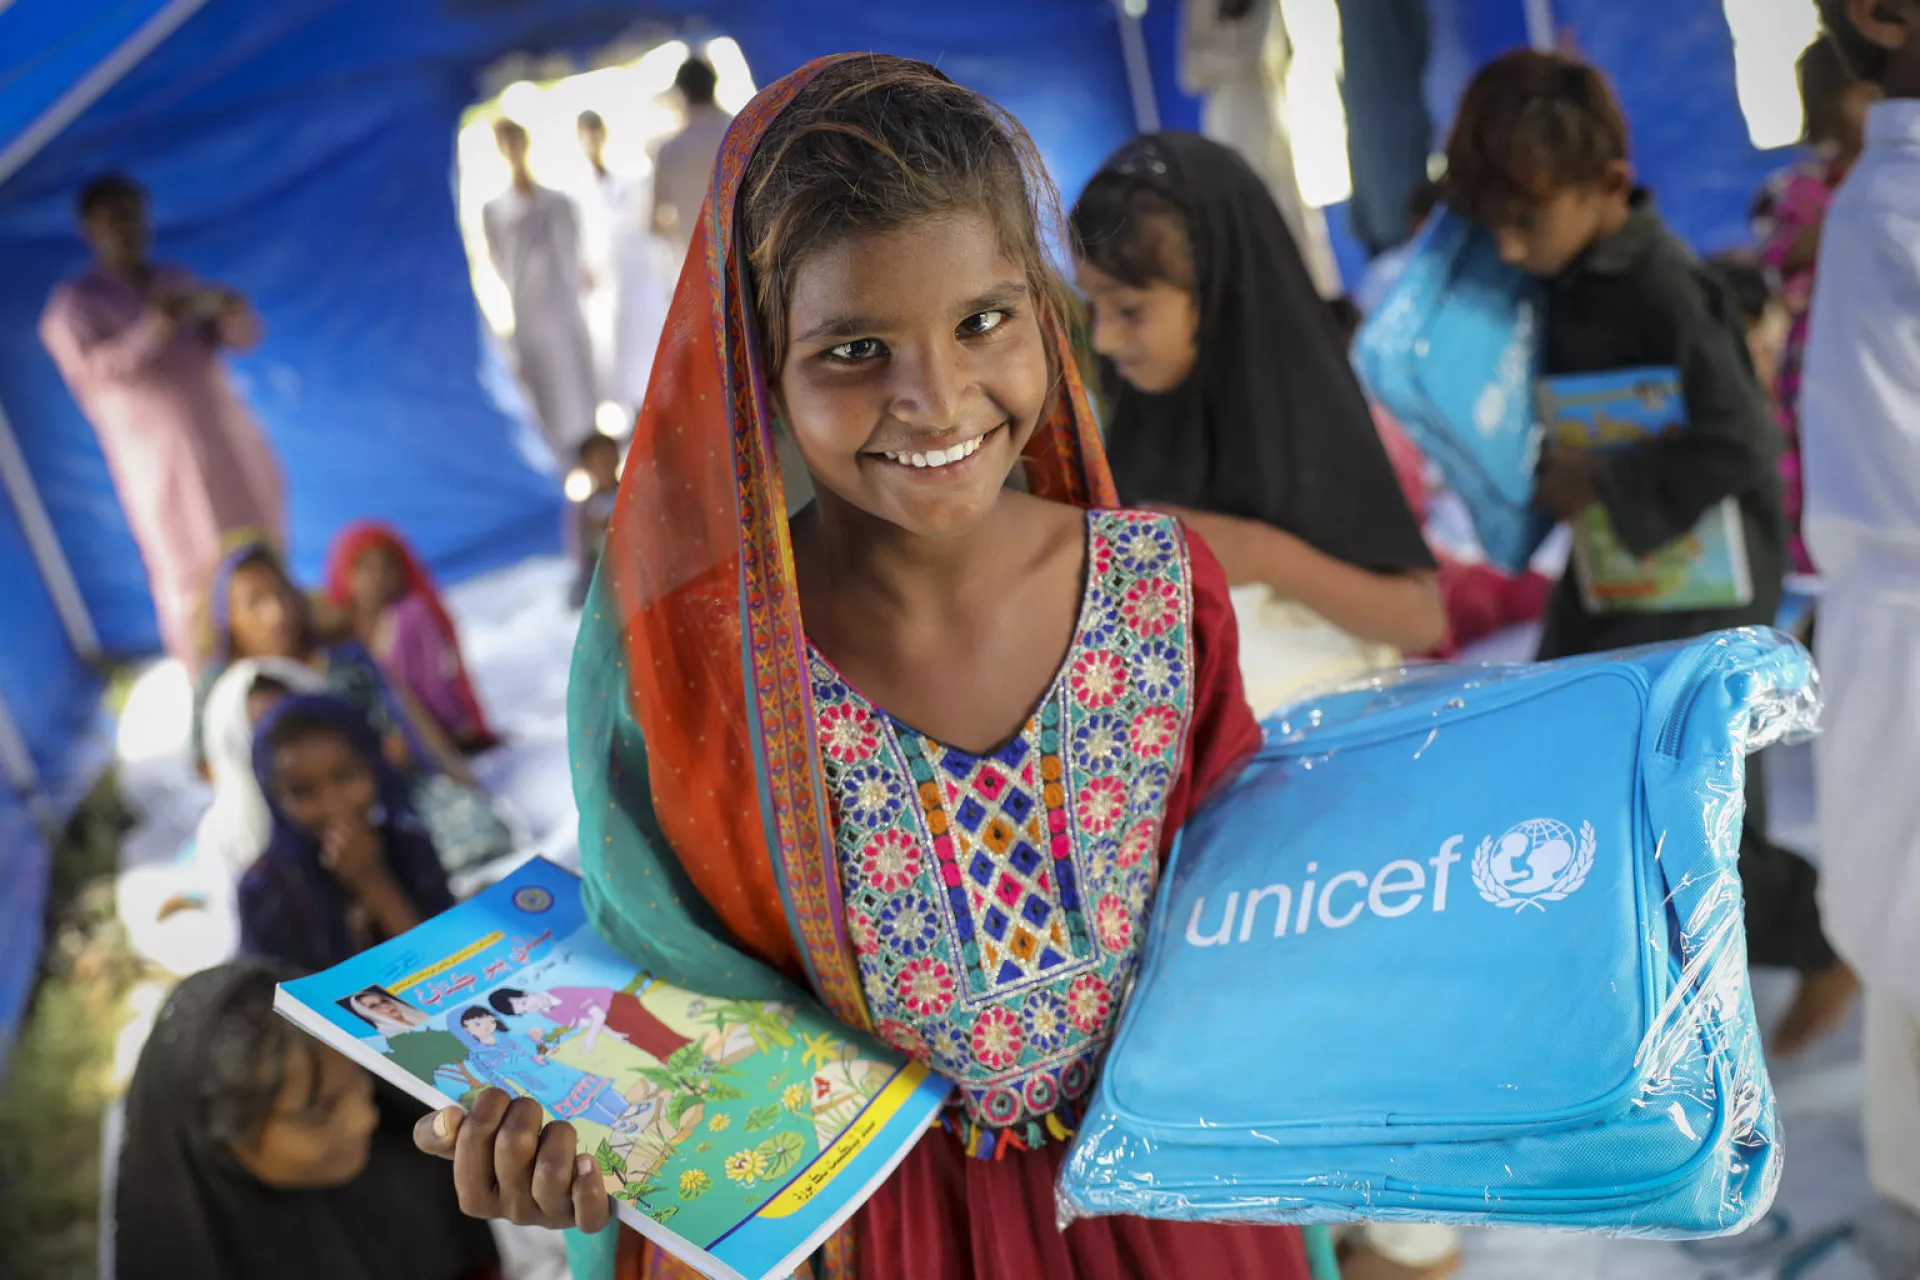 A girl receives a UNICEF bag and books during as part of support provided to flood affected children in Pakistan in 2022.